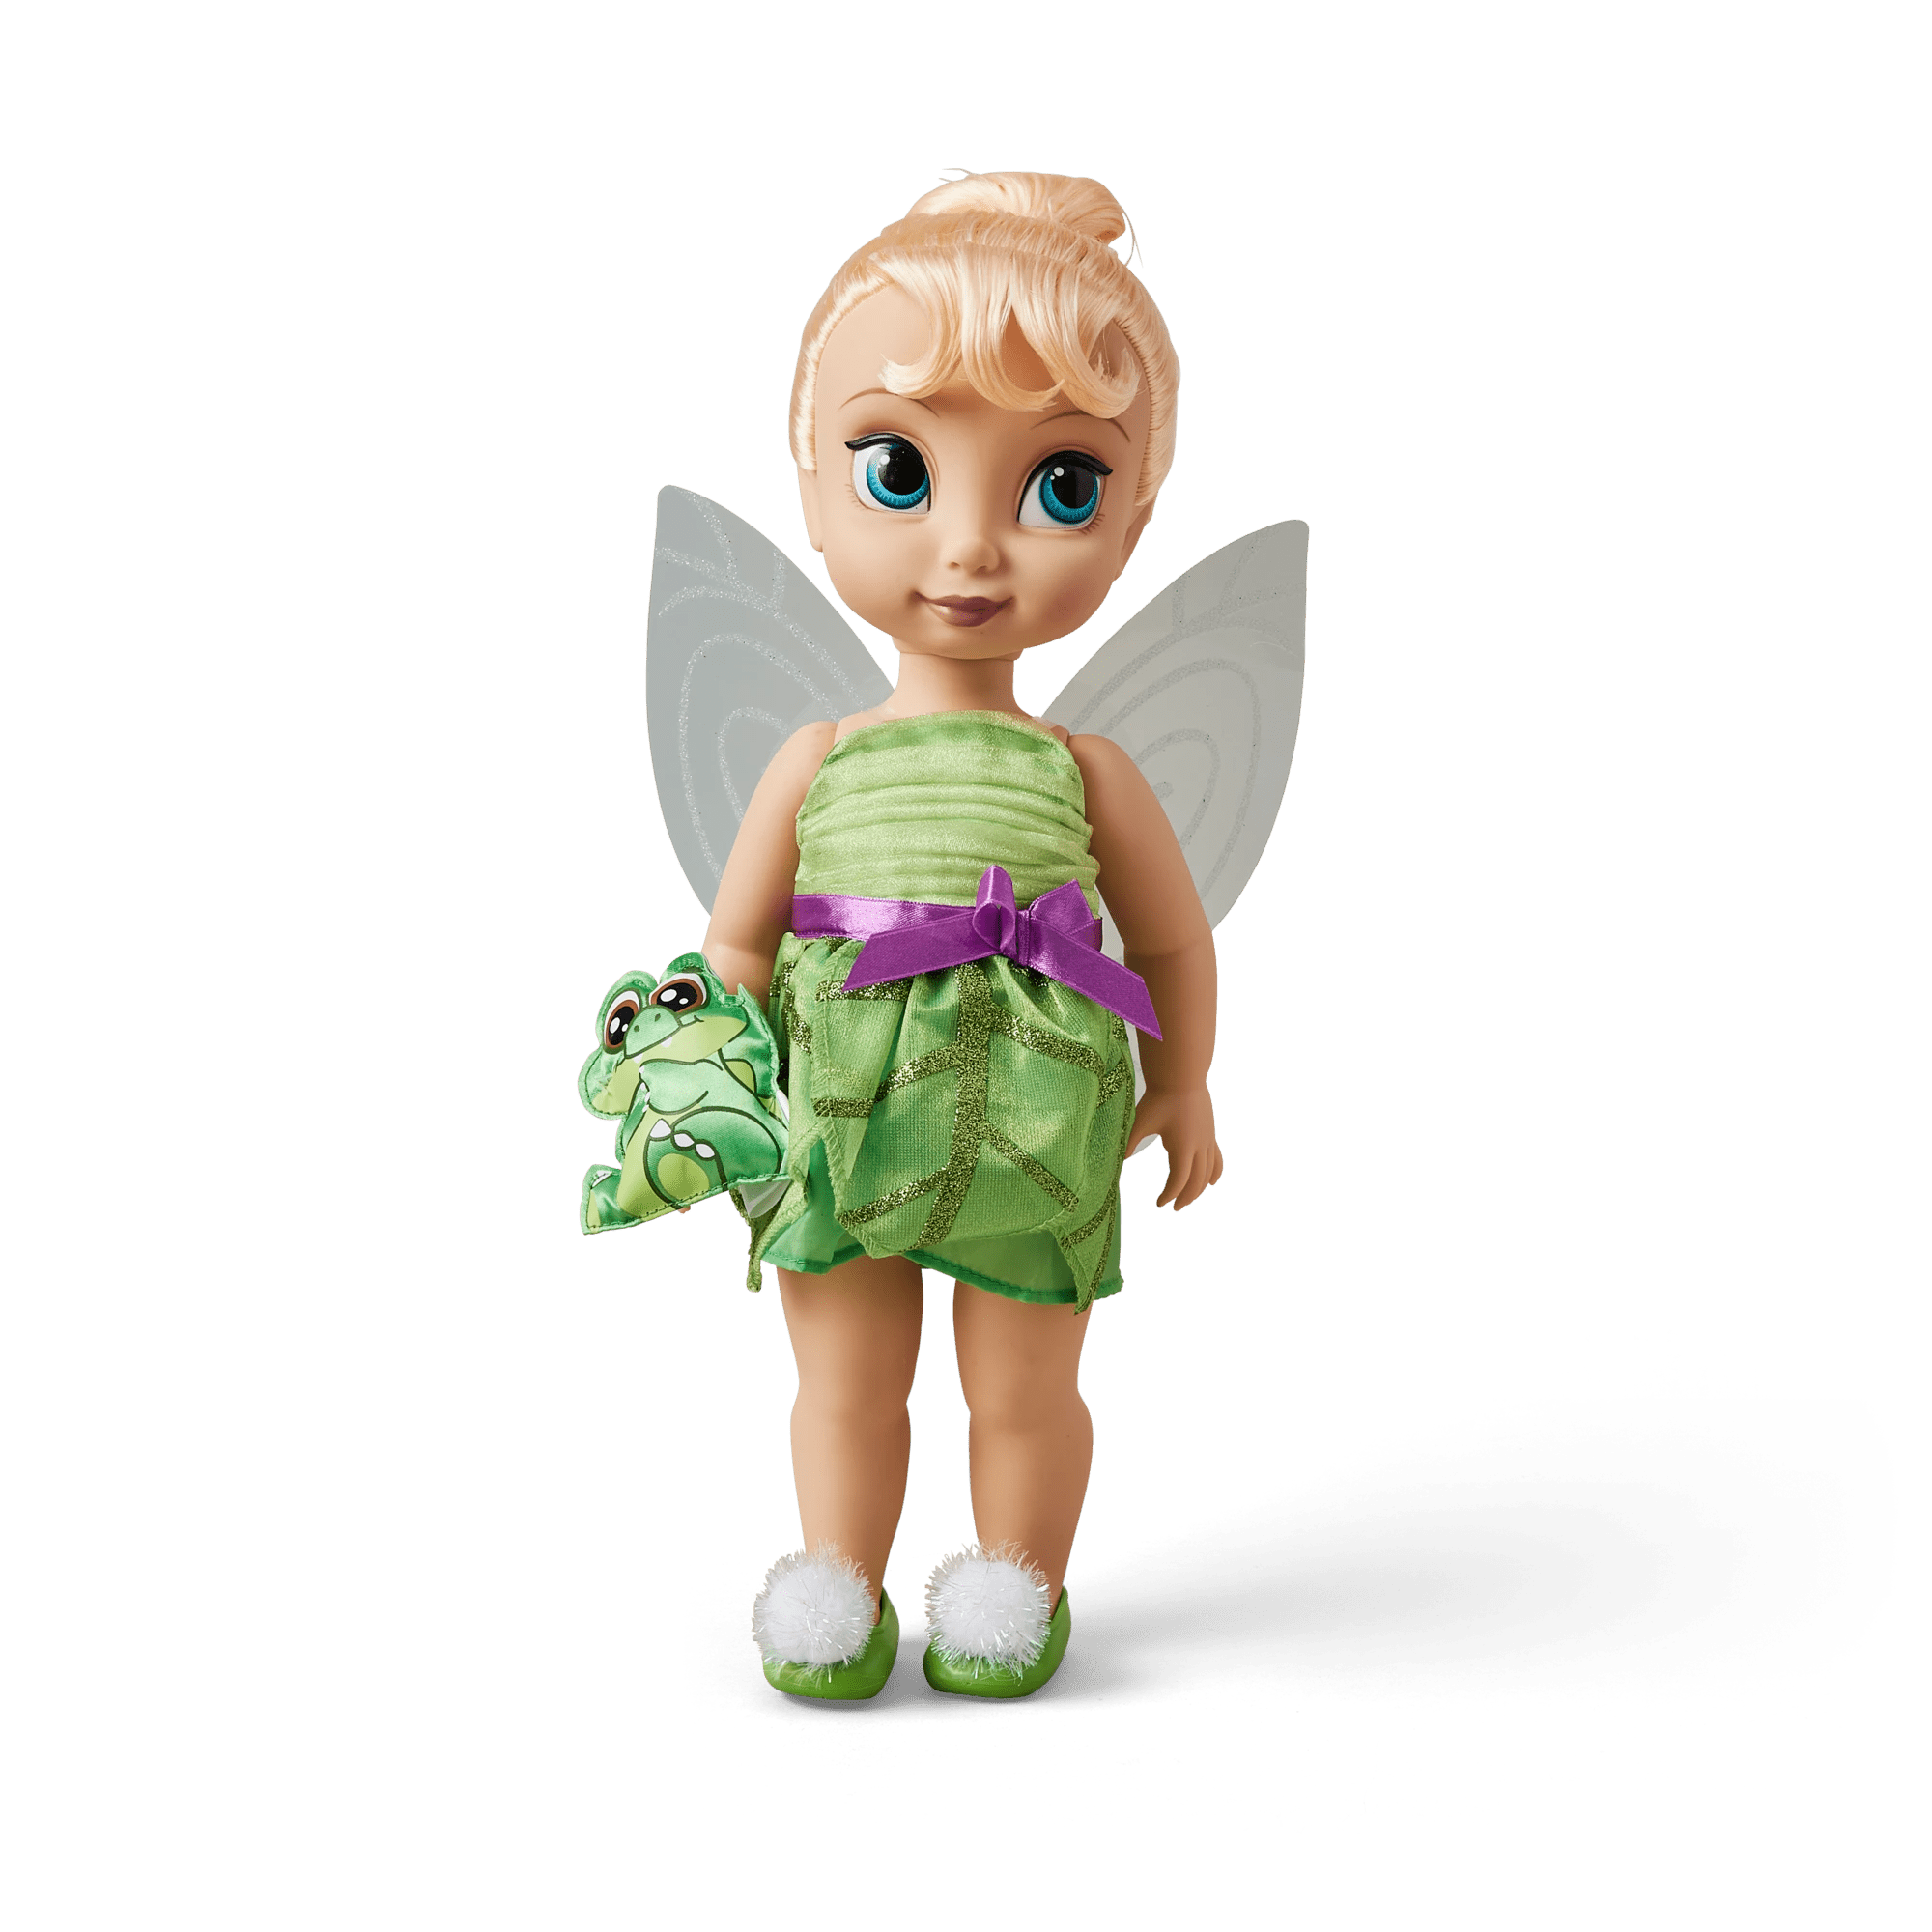 Disney Animators' Collection Tinker Bell Doll - Peter Pan - 16 Inch, Molded  Details, Fully Posable Toy in Satin Dress - Suitable for Ages 3+ Toy